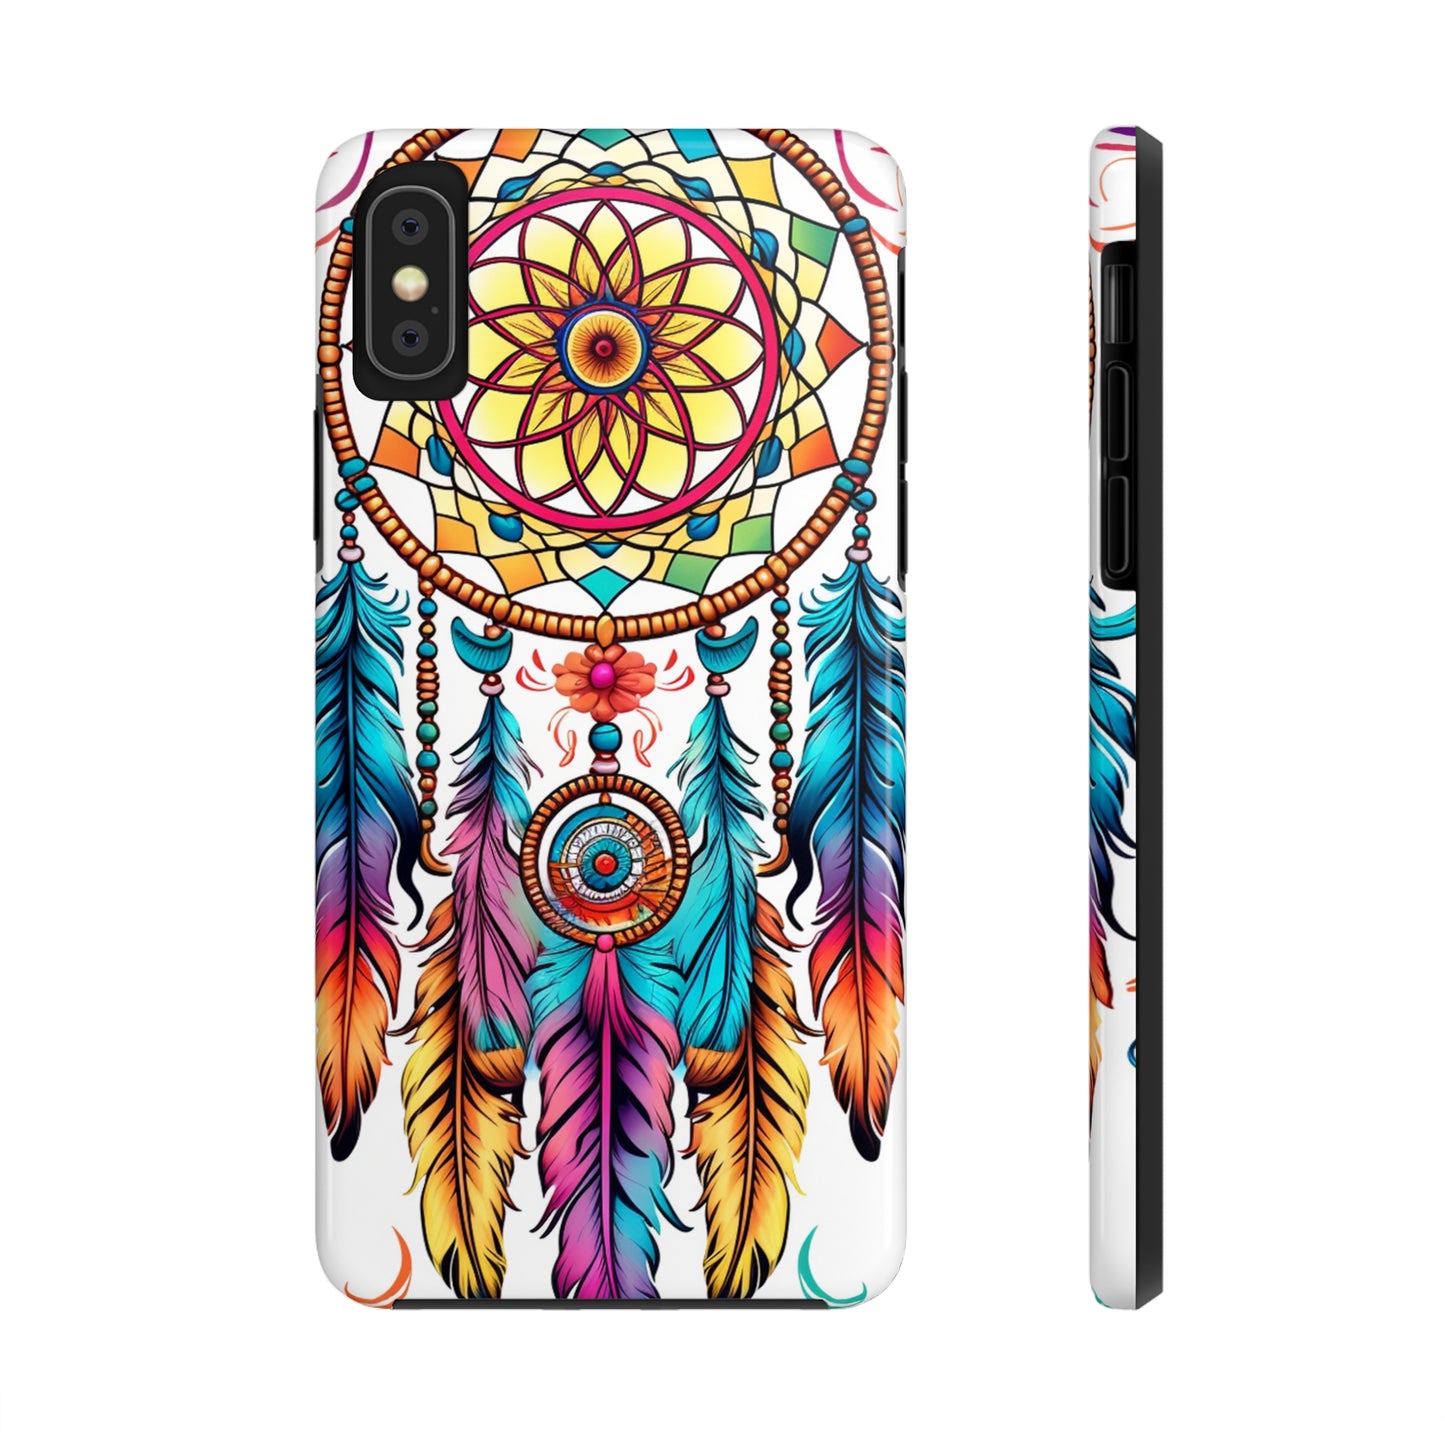 Psychedelic Native American Dreamcatcher iPhone Case